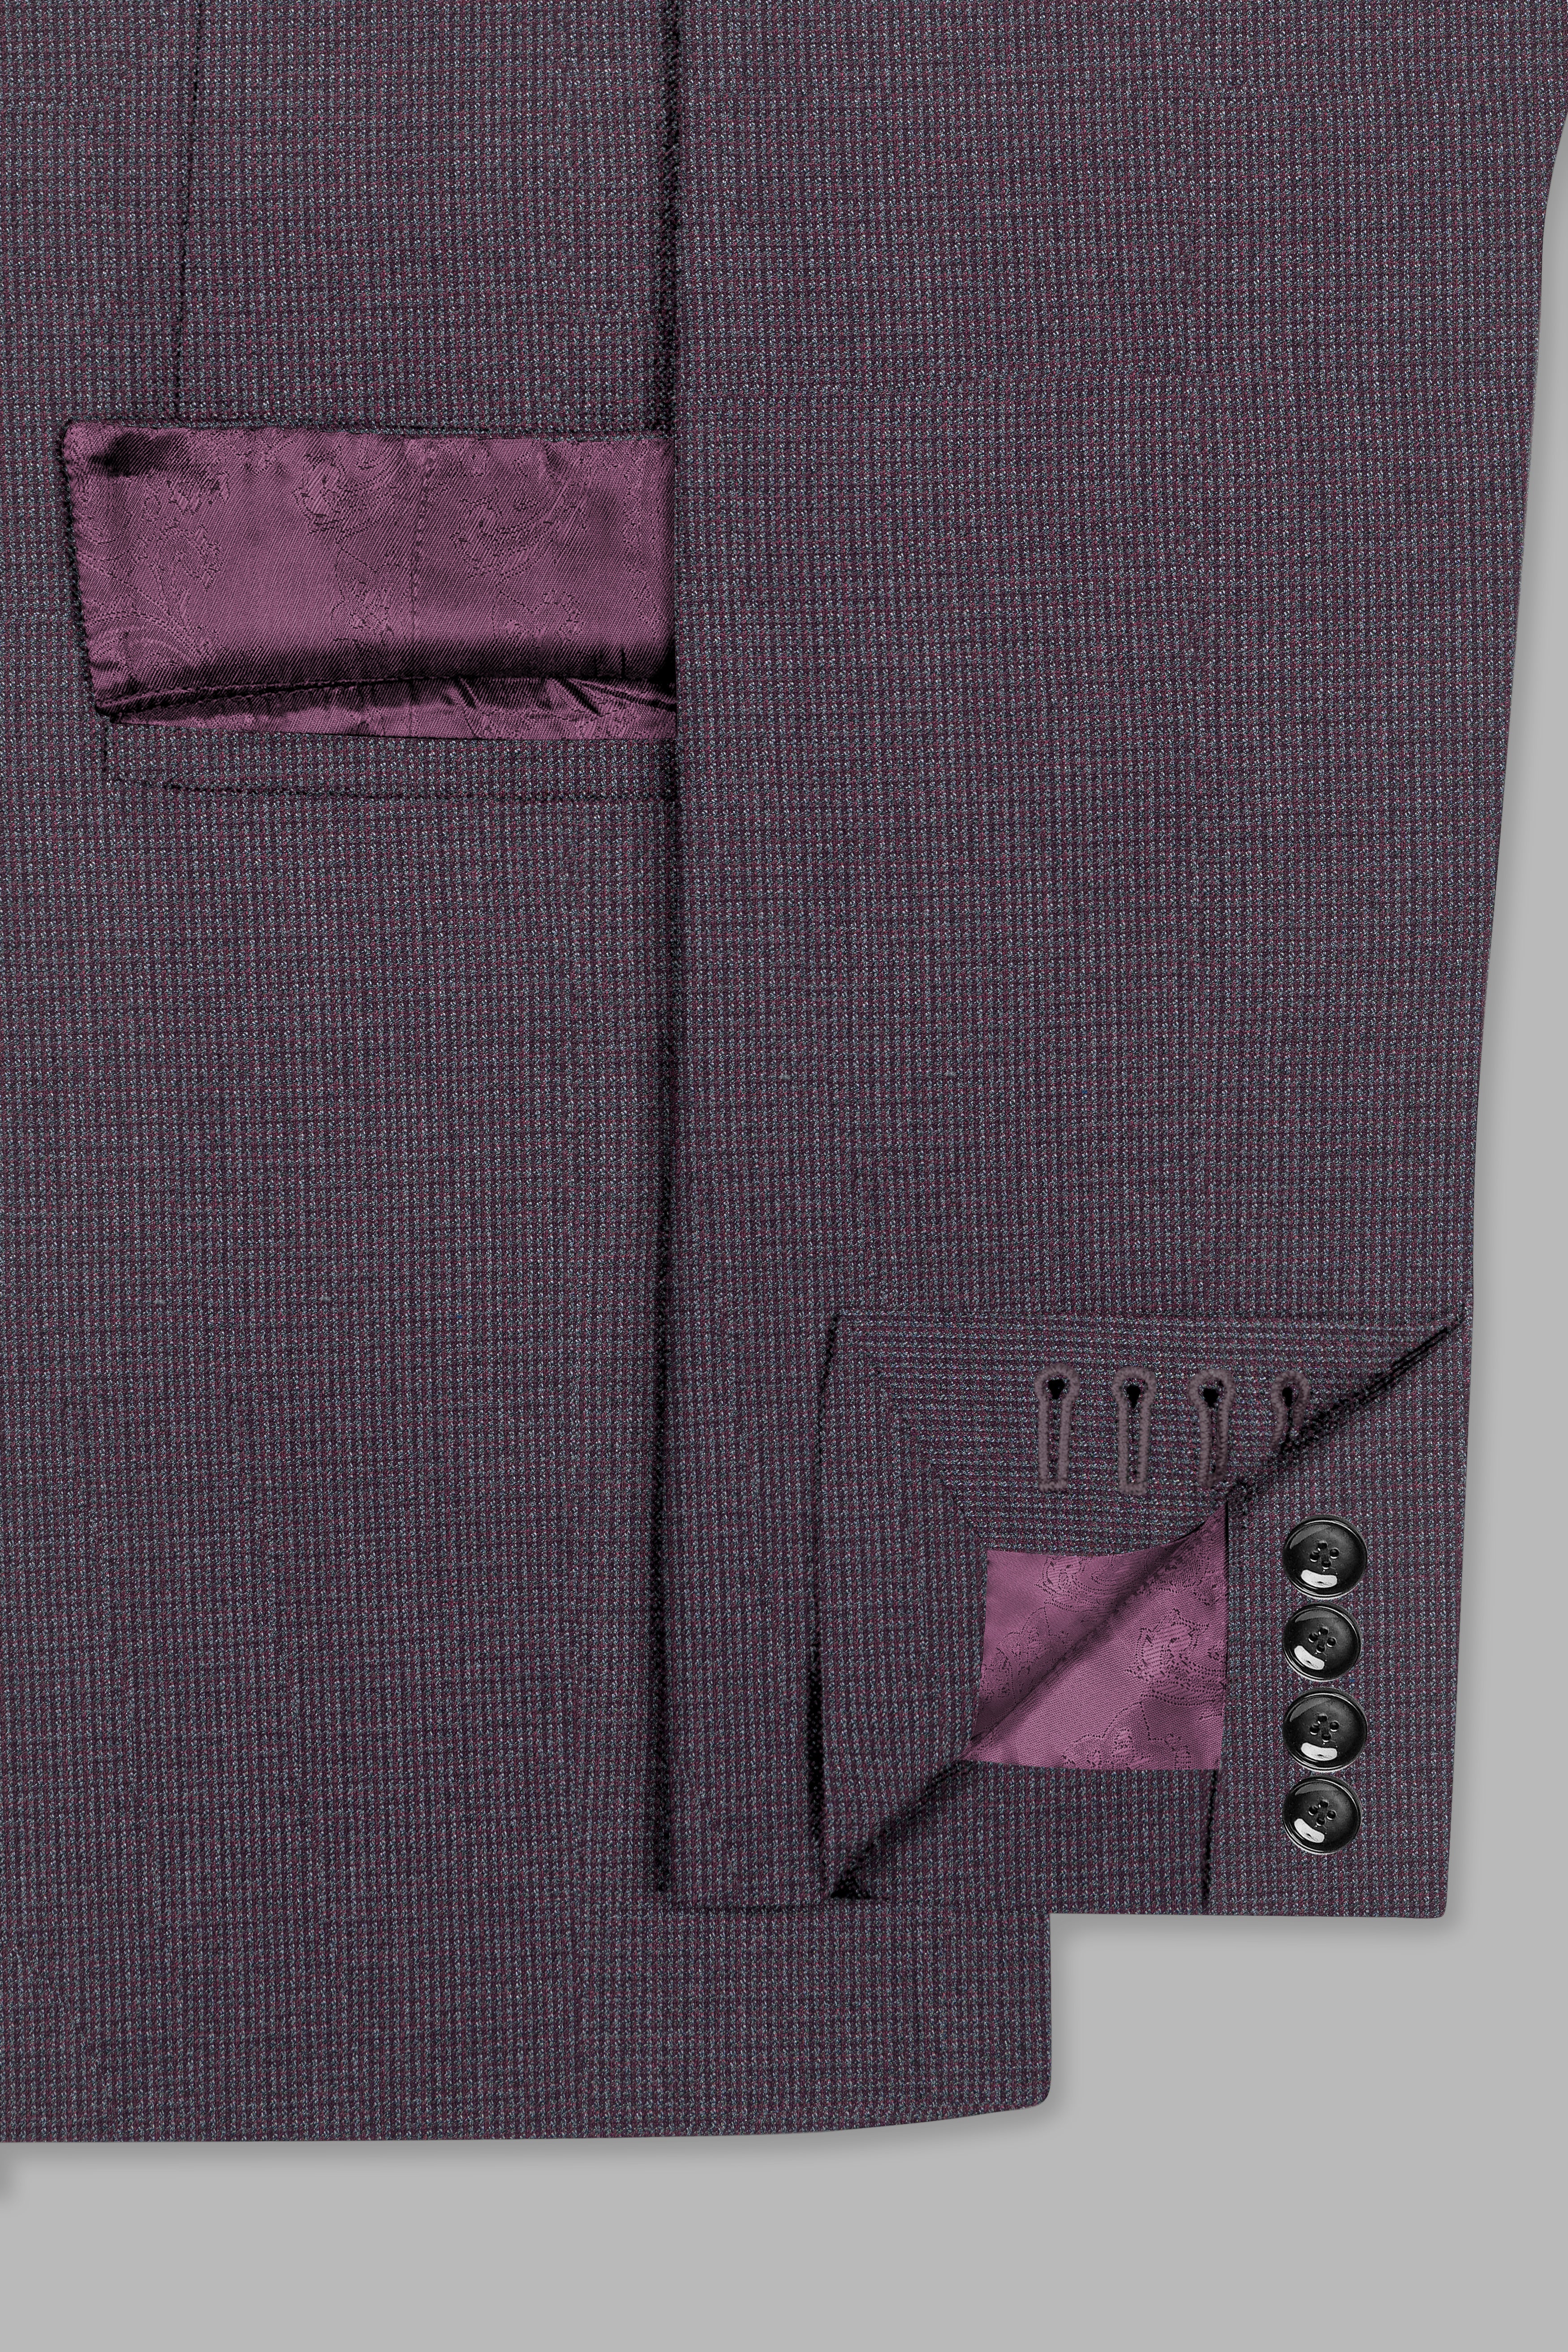 Thunder Purple Textured Wool Rich Double Breasted Suit